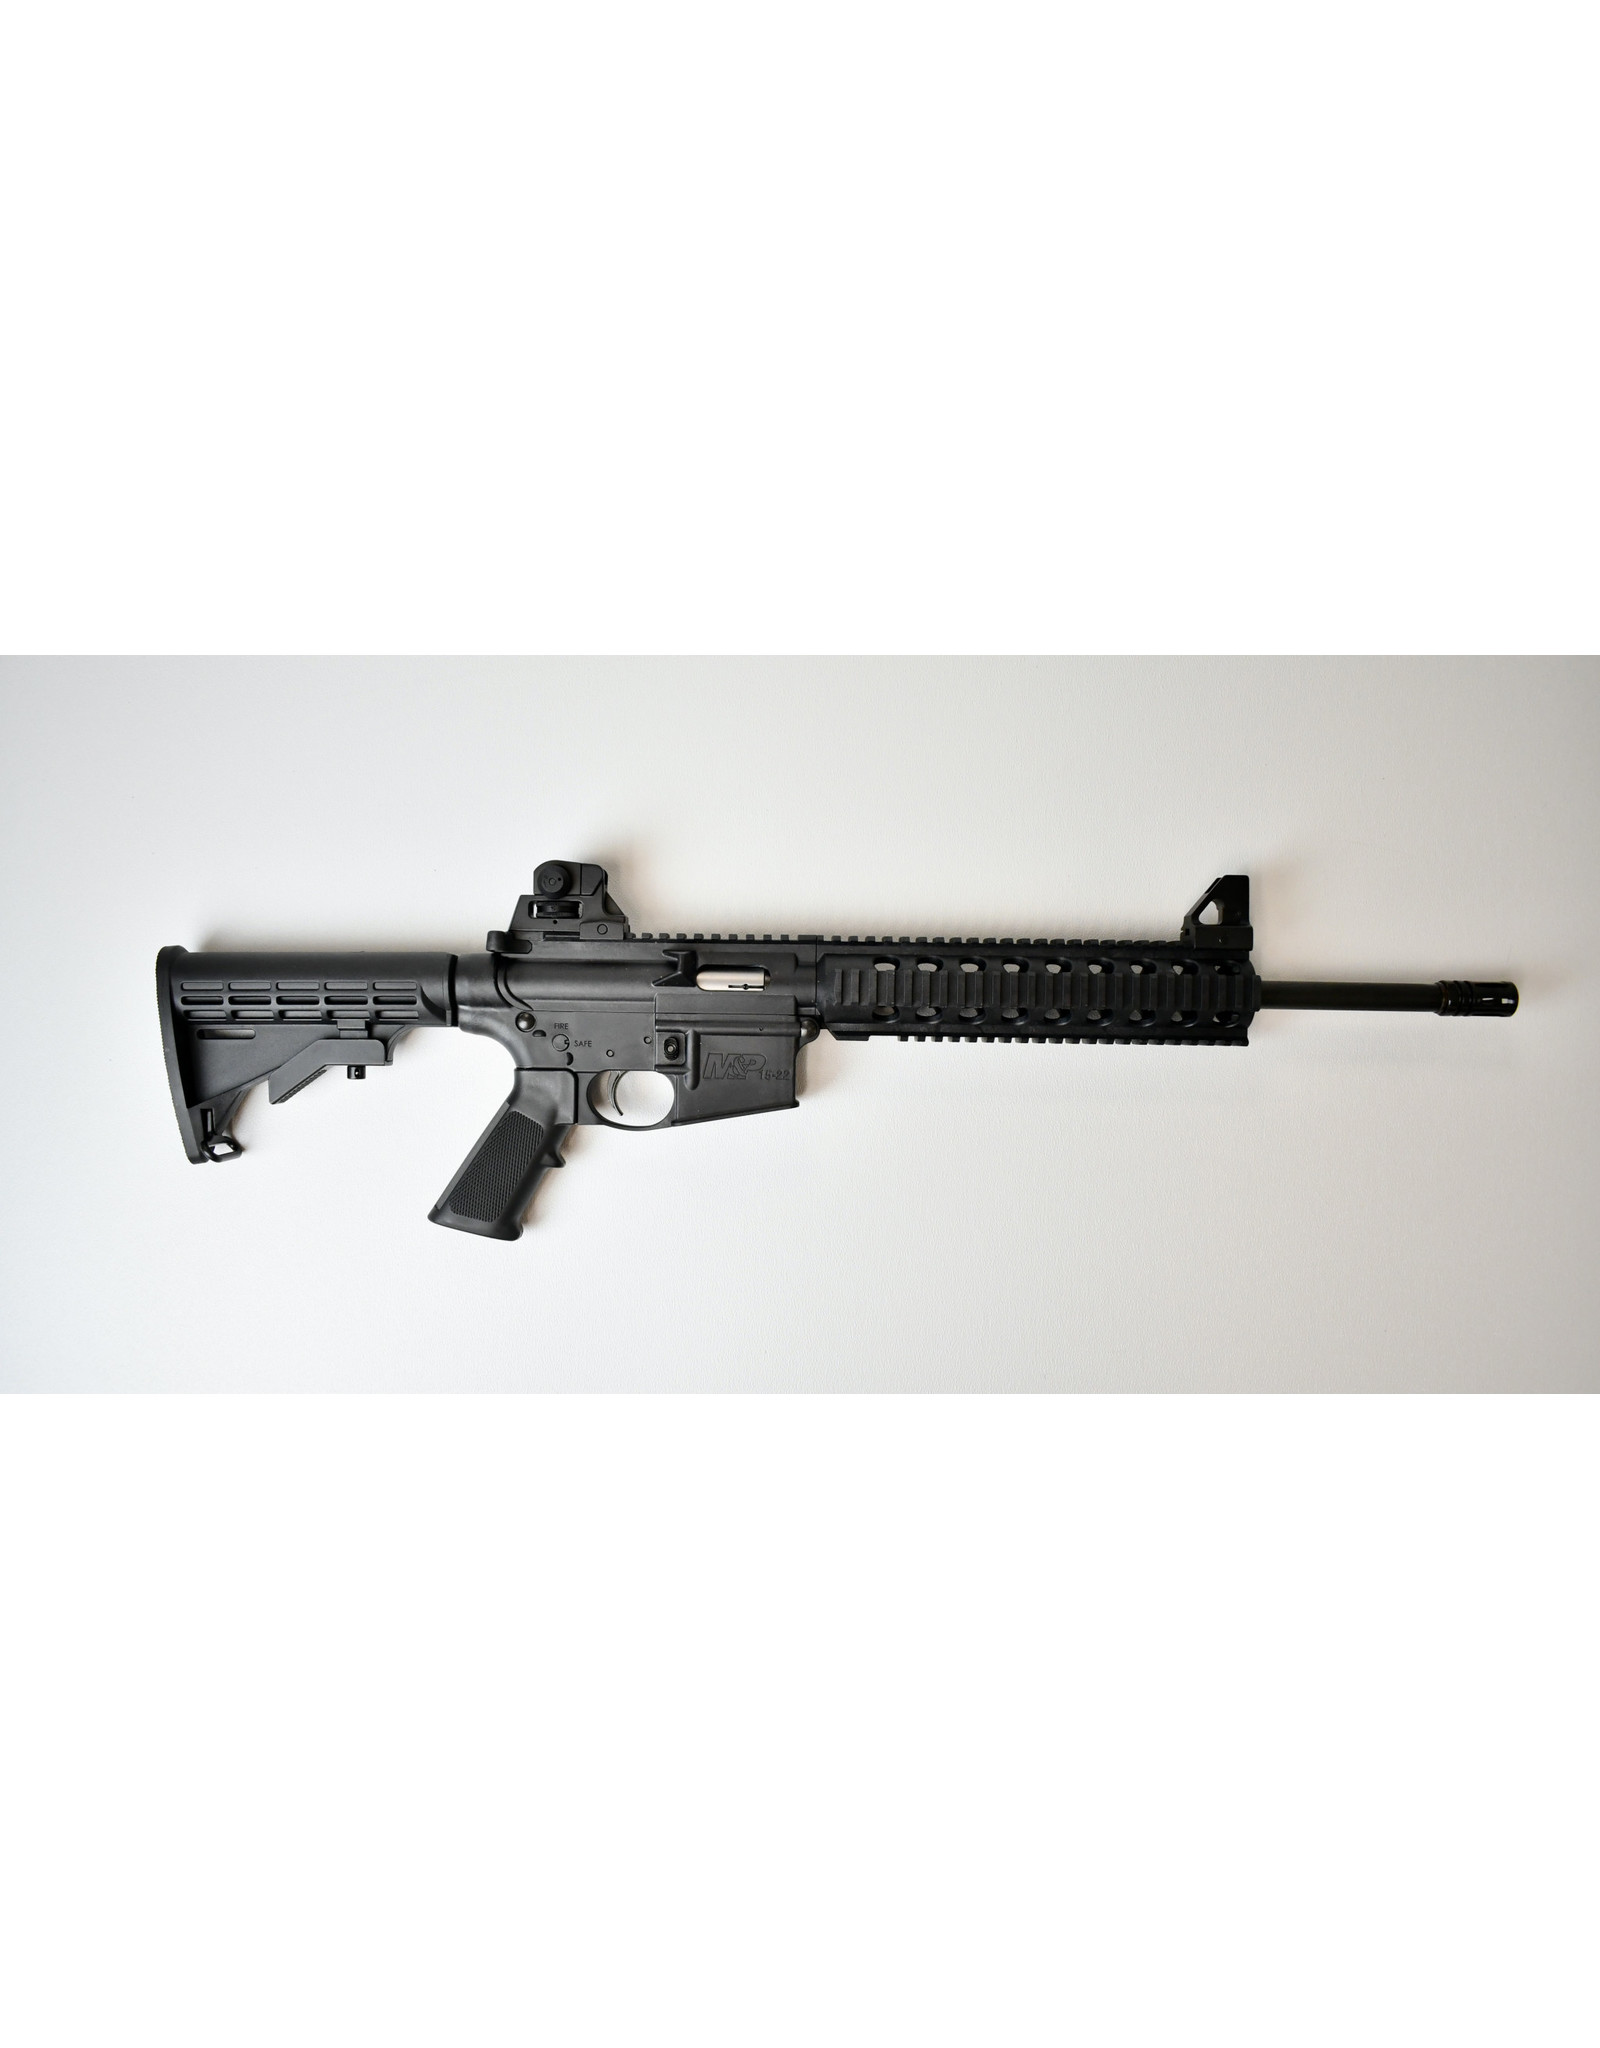 Smith + Wesson Smith & Wesson MP15-22 22lr S/N DZA9596 LN 55